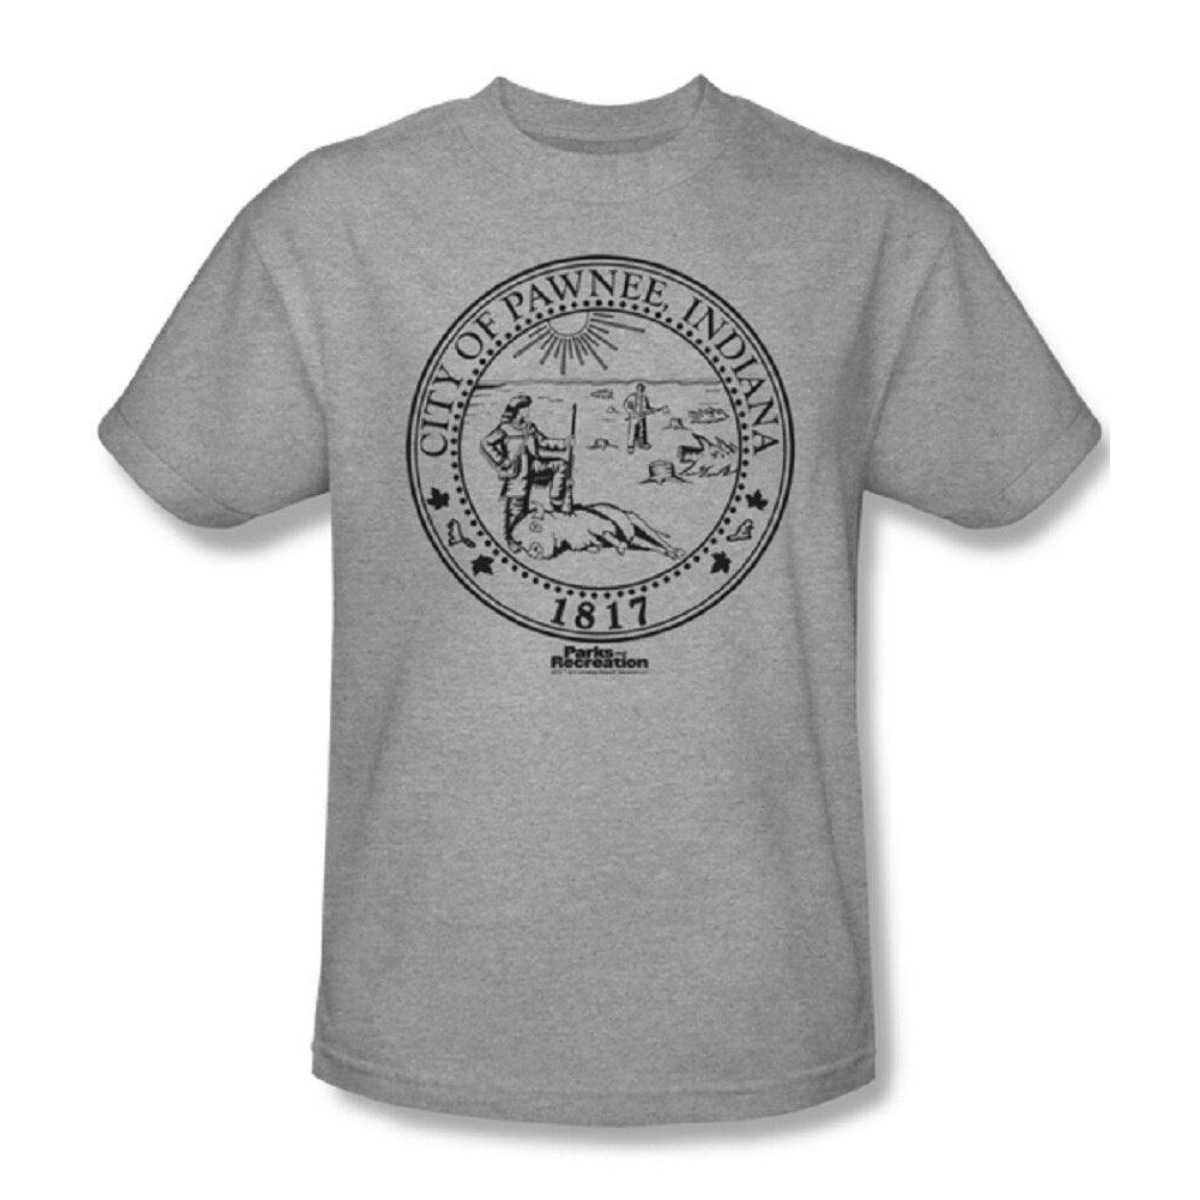 Parks and Recreation Pawnee Seal T-Shirt